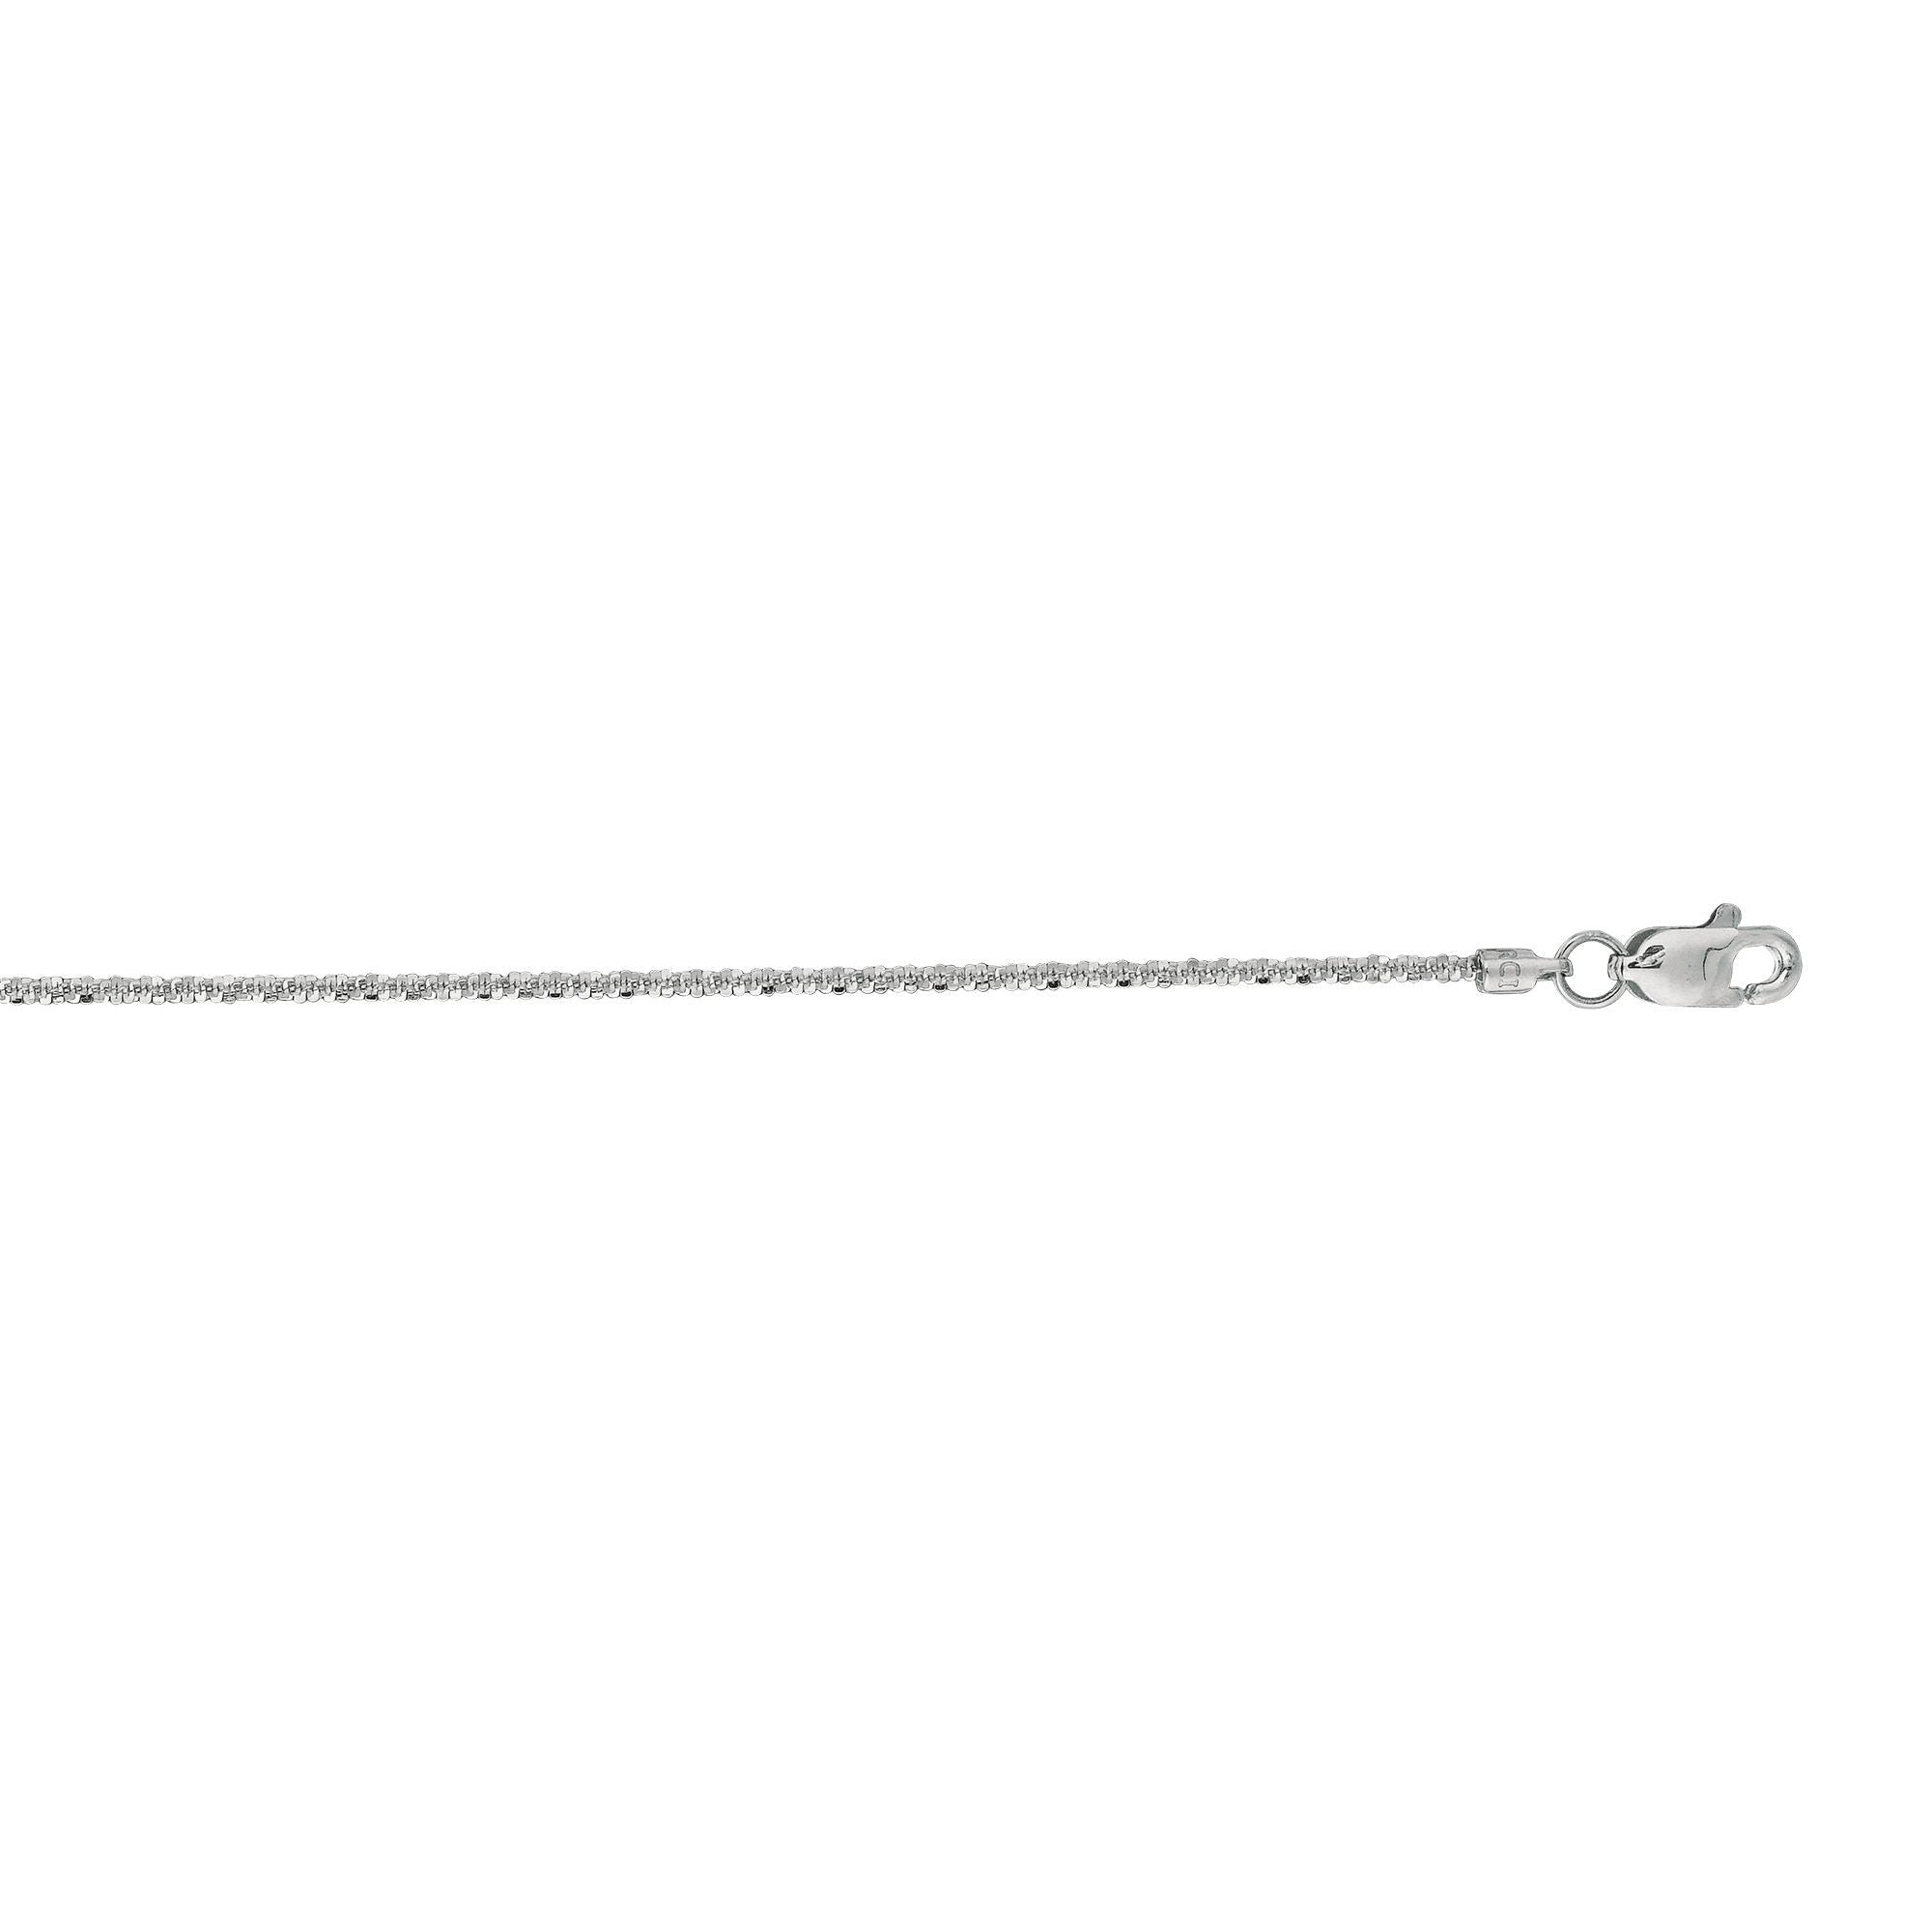 Shiny Diamond Cut Sparkle Chain with Lobster Clasp - wingroupjewelry